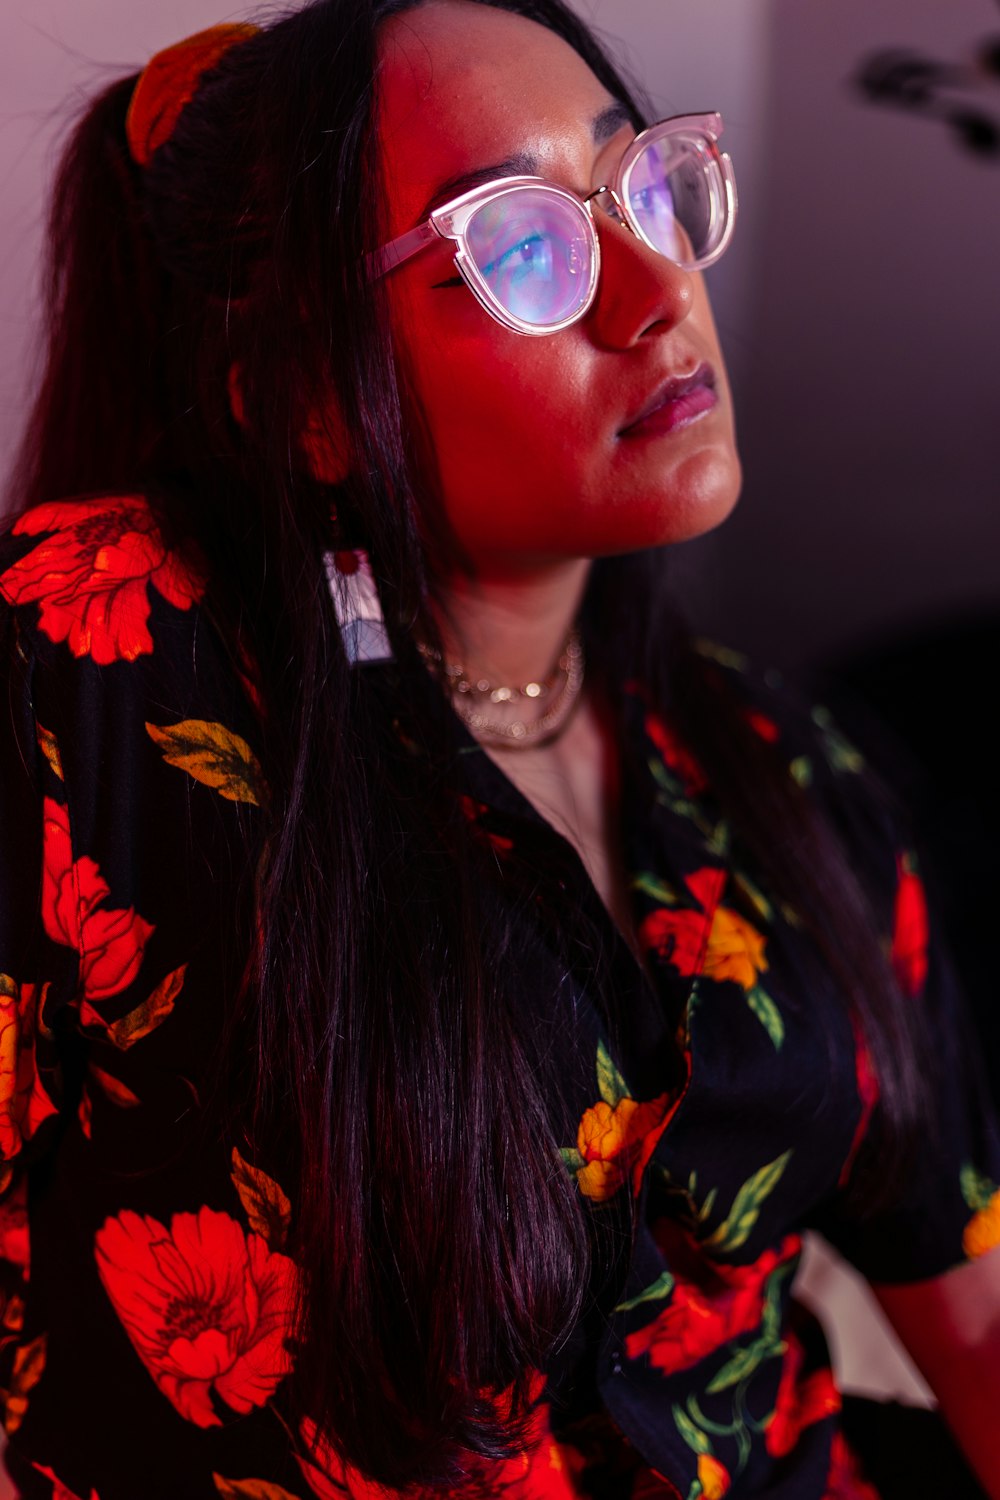 woman in black and red floral shirt wearing sunglasses